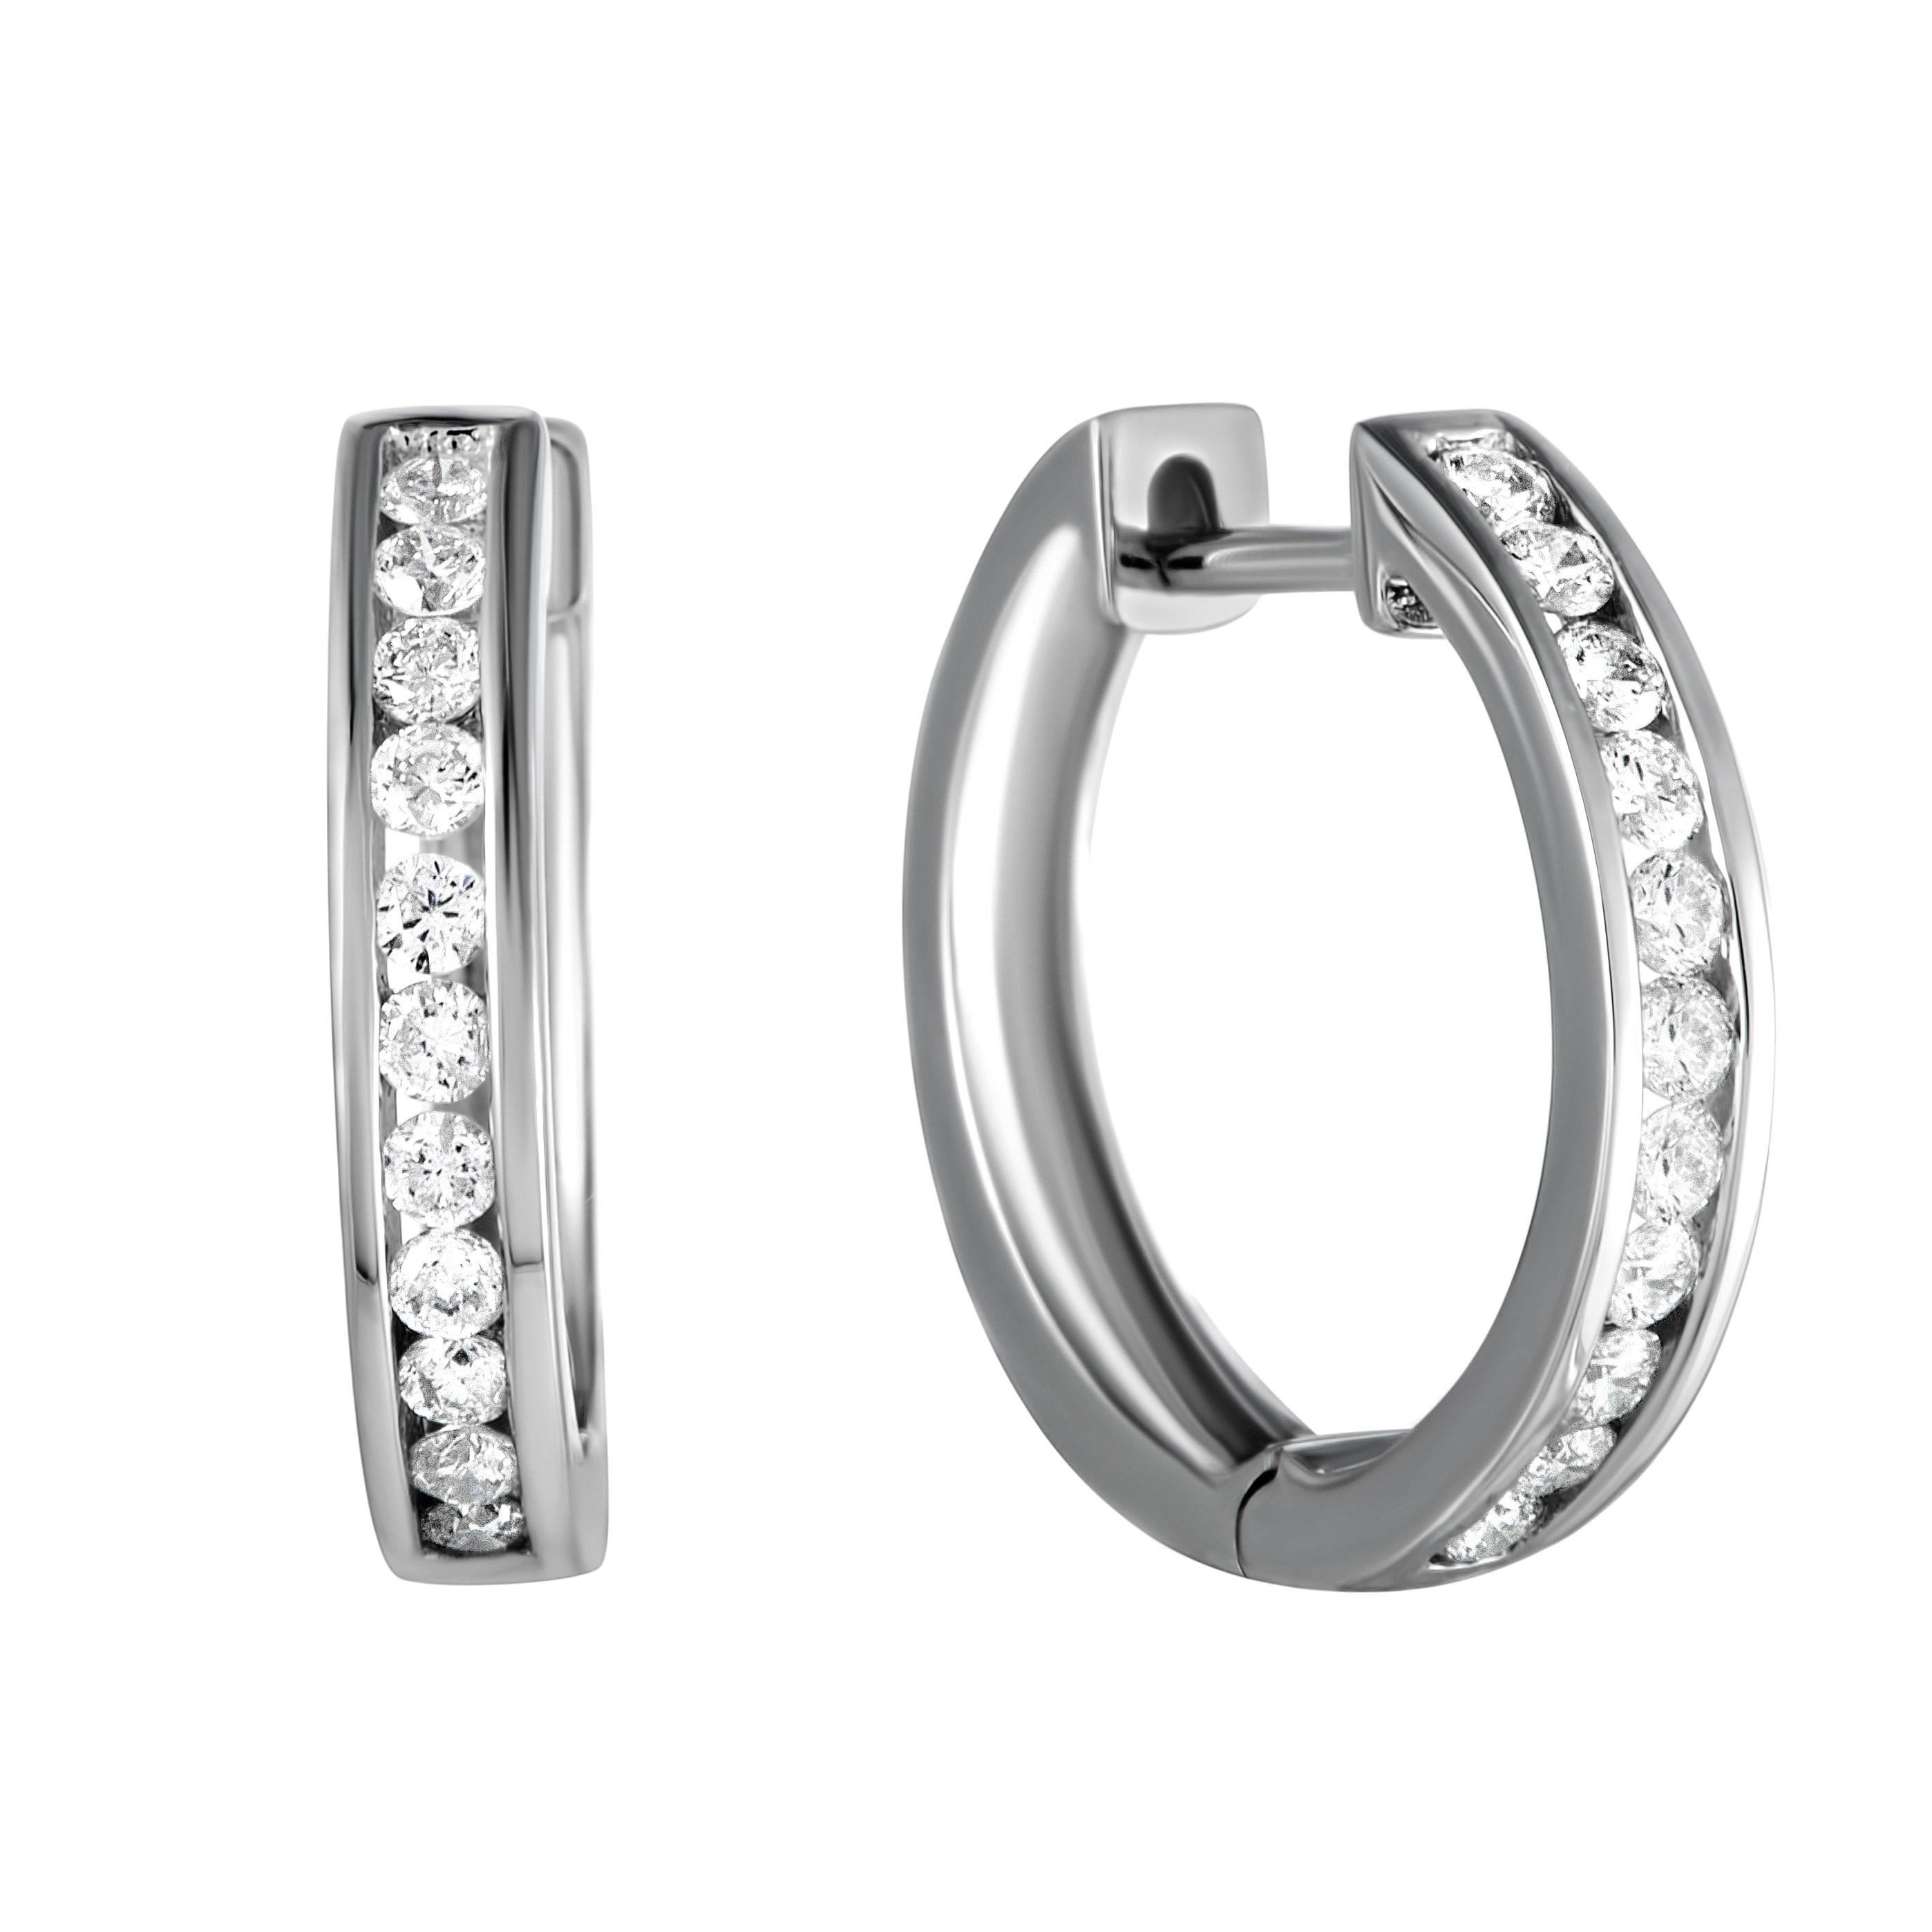 Exceptionally stylish, charmingly feminine and remarkably understated, these wonderful earrings are made of gracefully shaped 14K white gold which is lined with lustrous diamonds amounting to 0.50ct for a stunning effect.